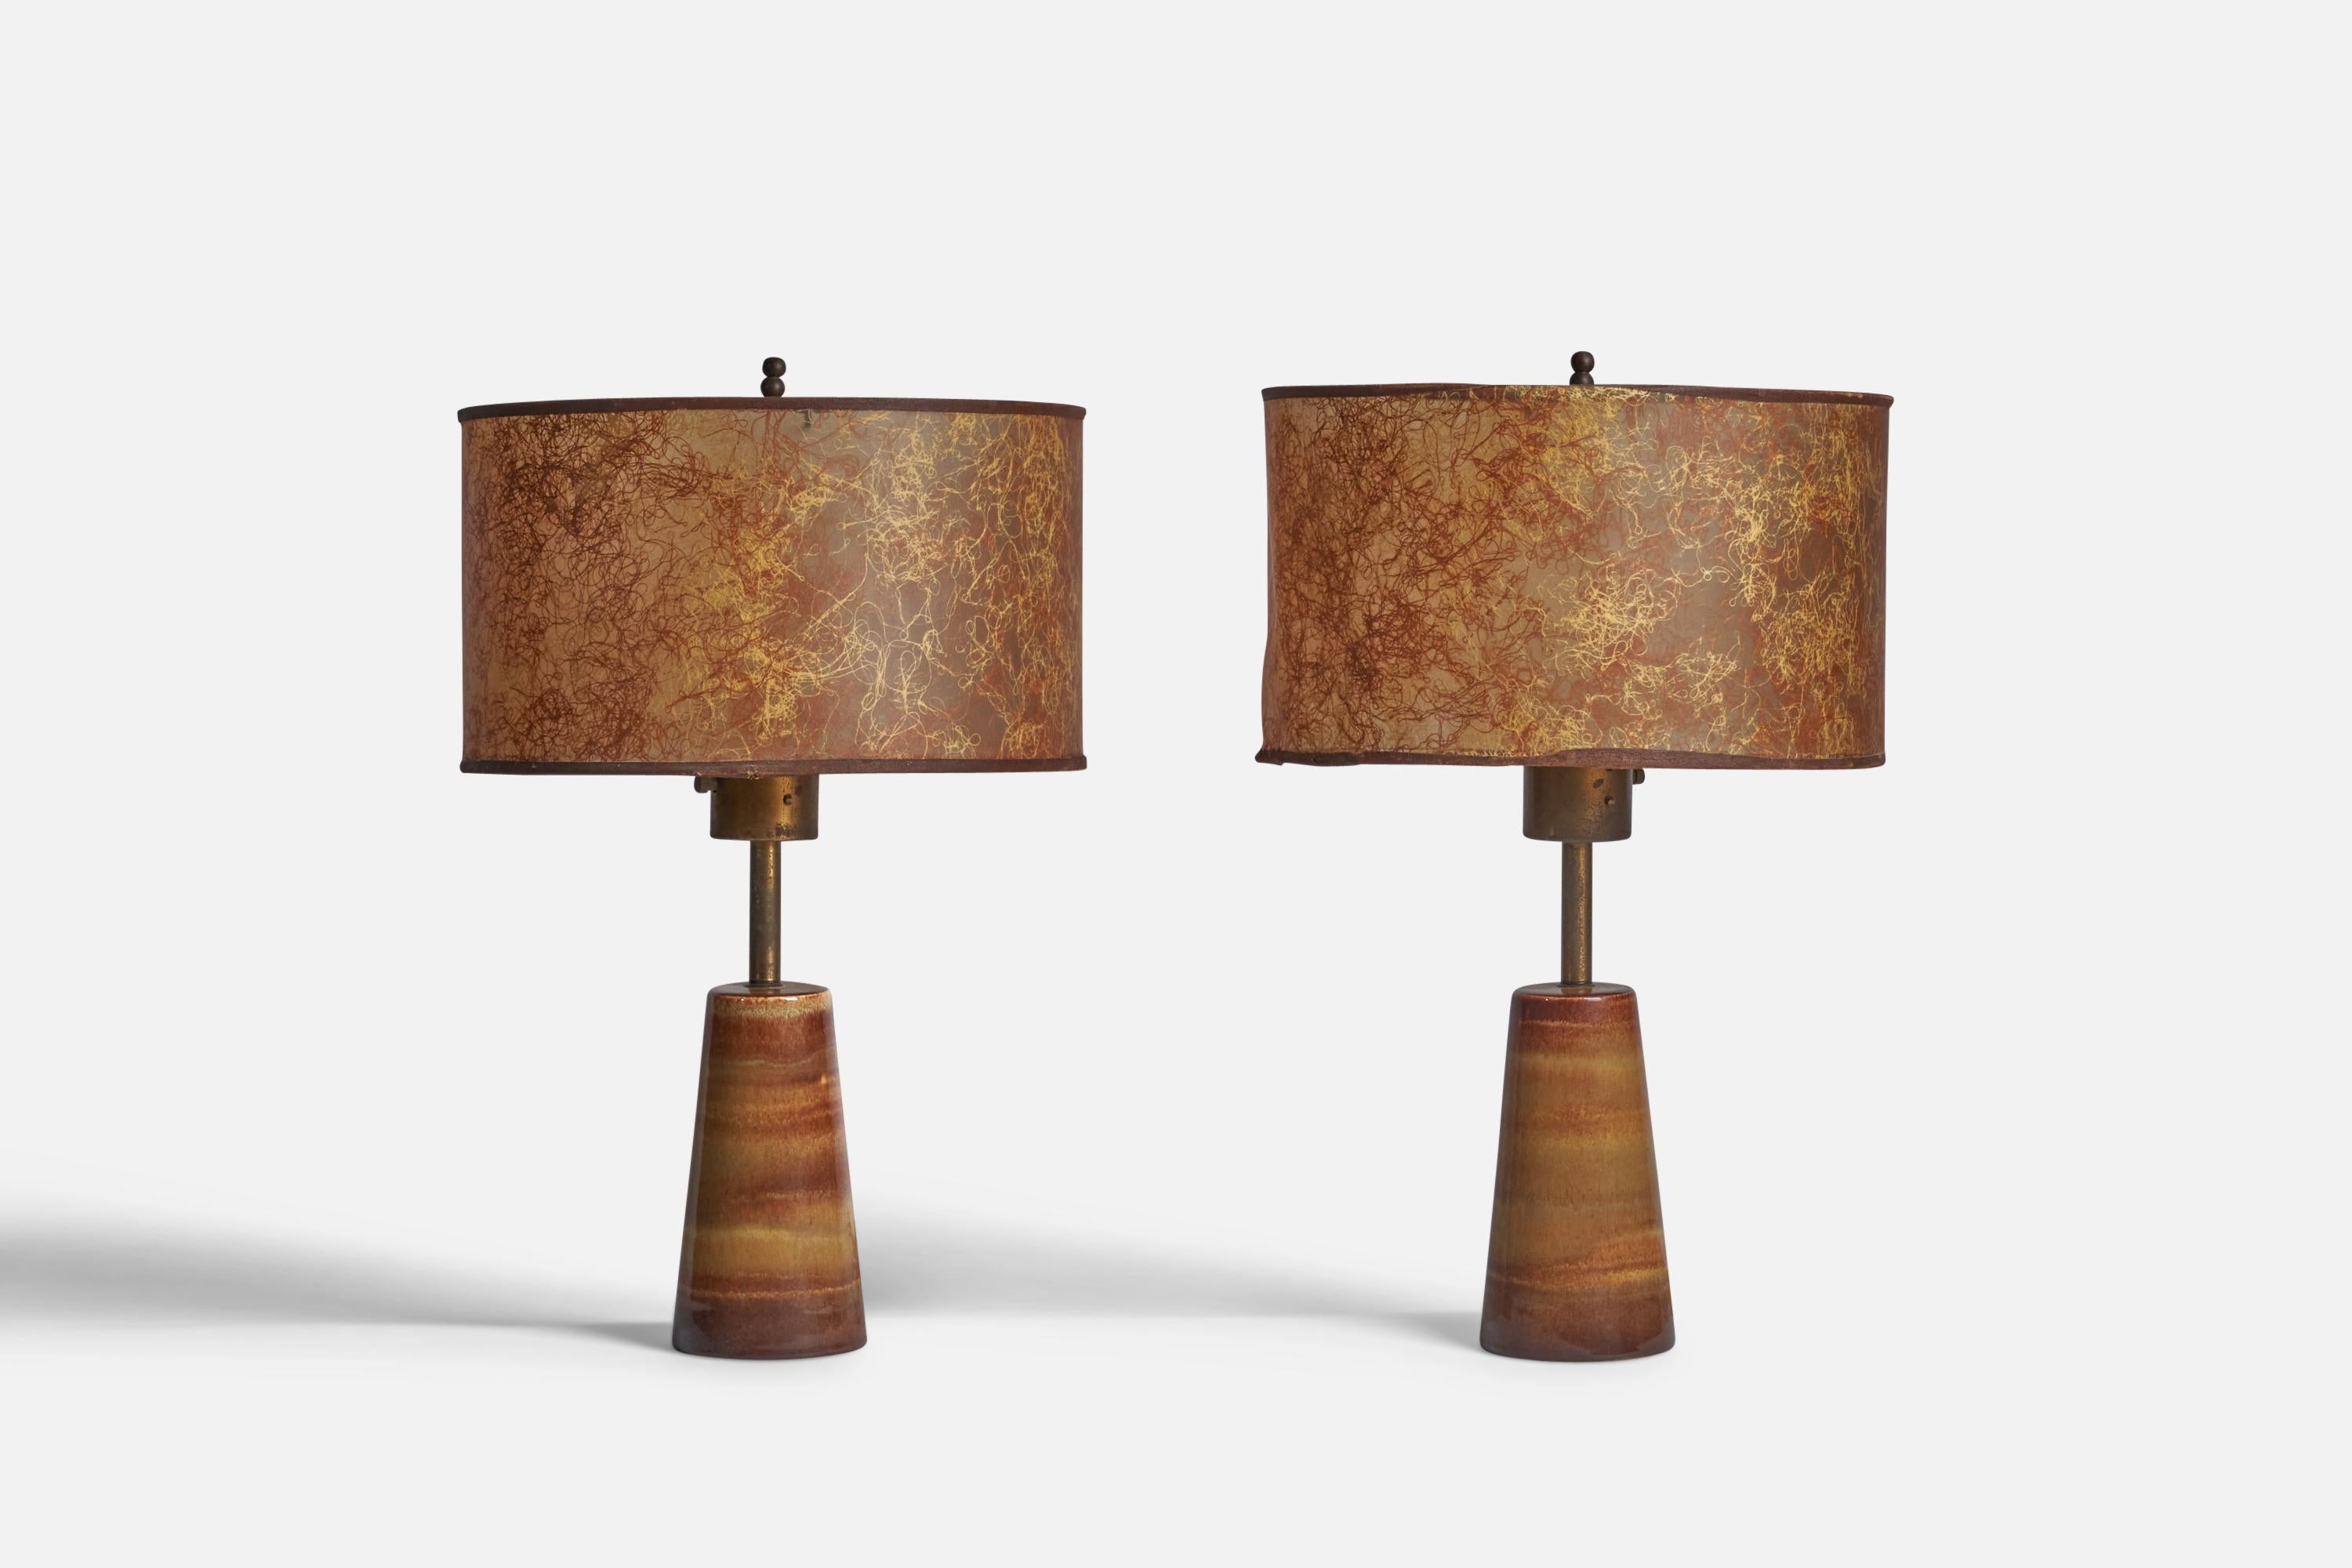 A pair of brown-glazed ceramic, brass, and fiberglass table lamps, designed and produced in the US, 1950s.

Overall Dimensions (inches): 19.5